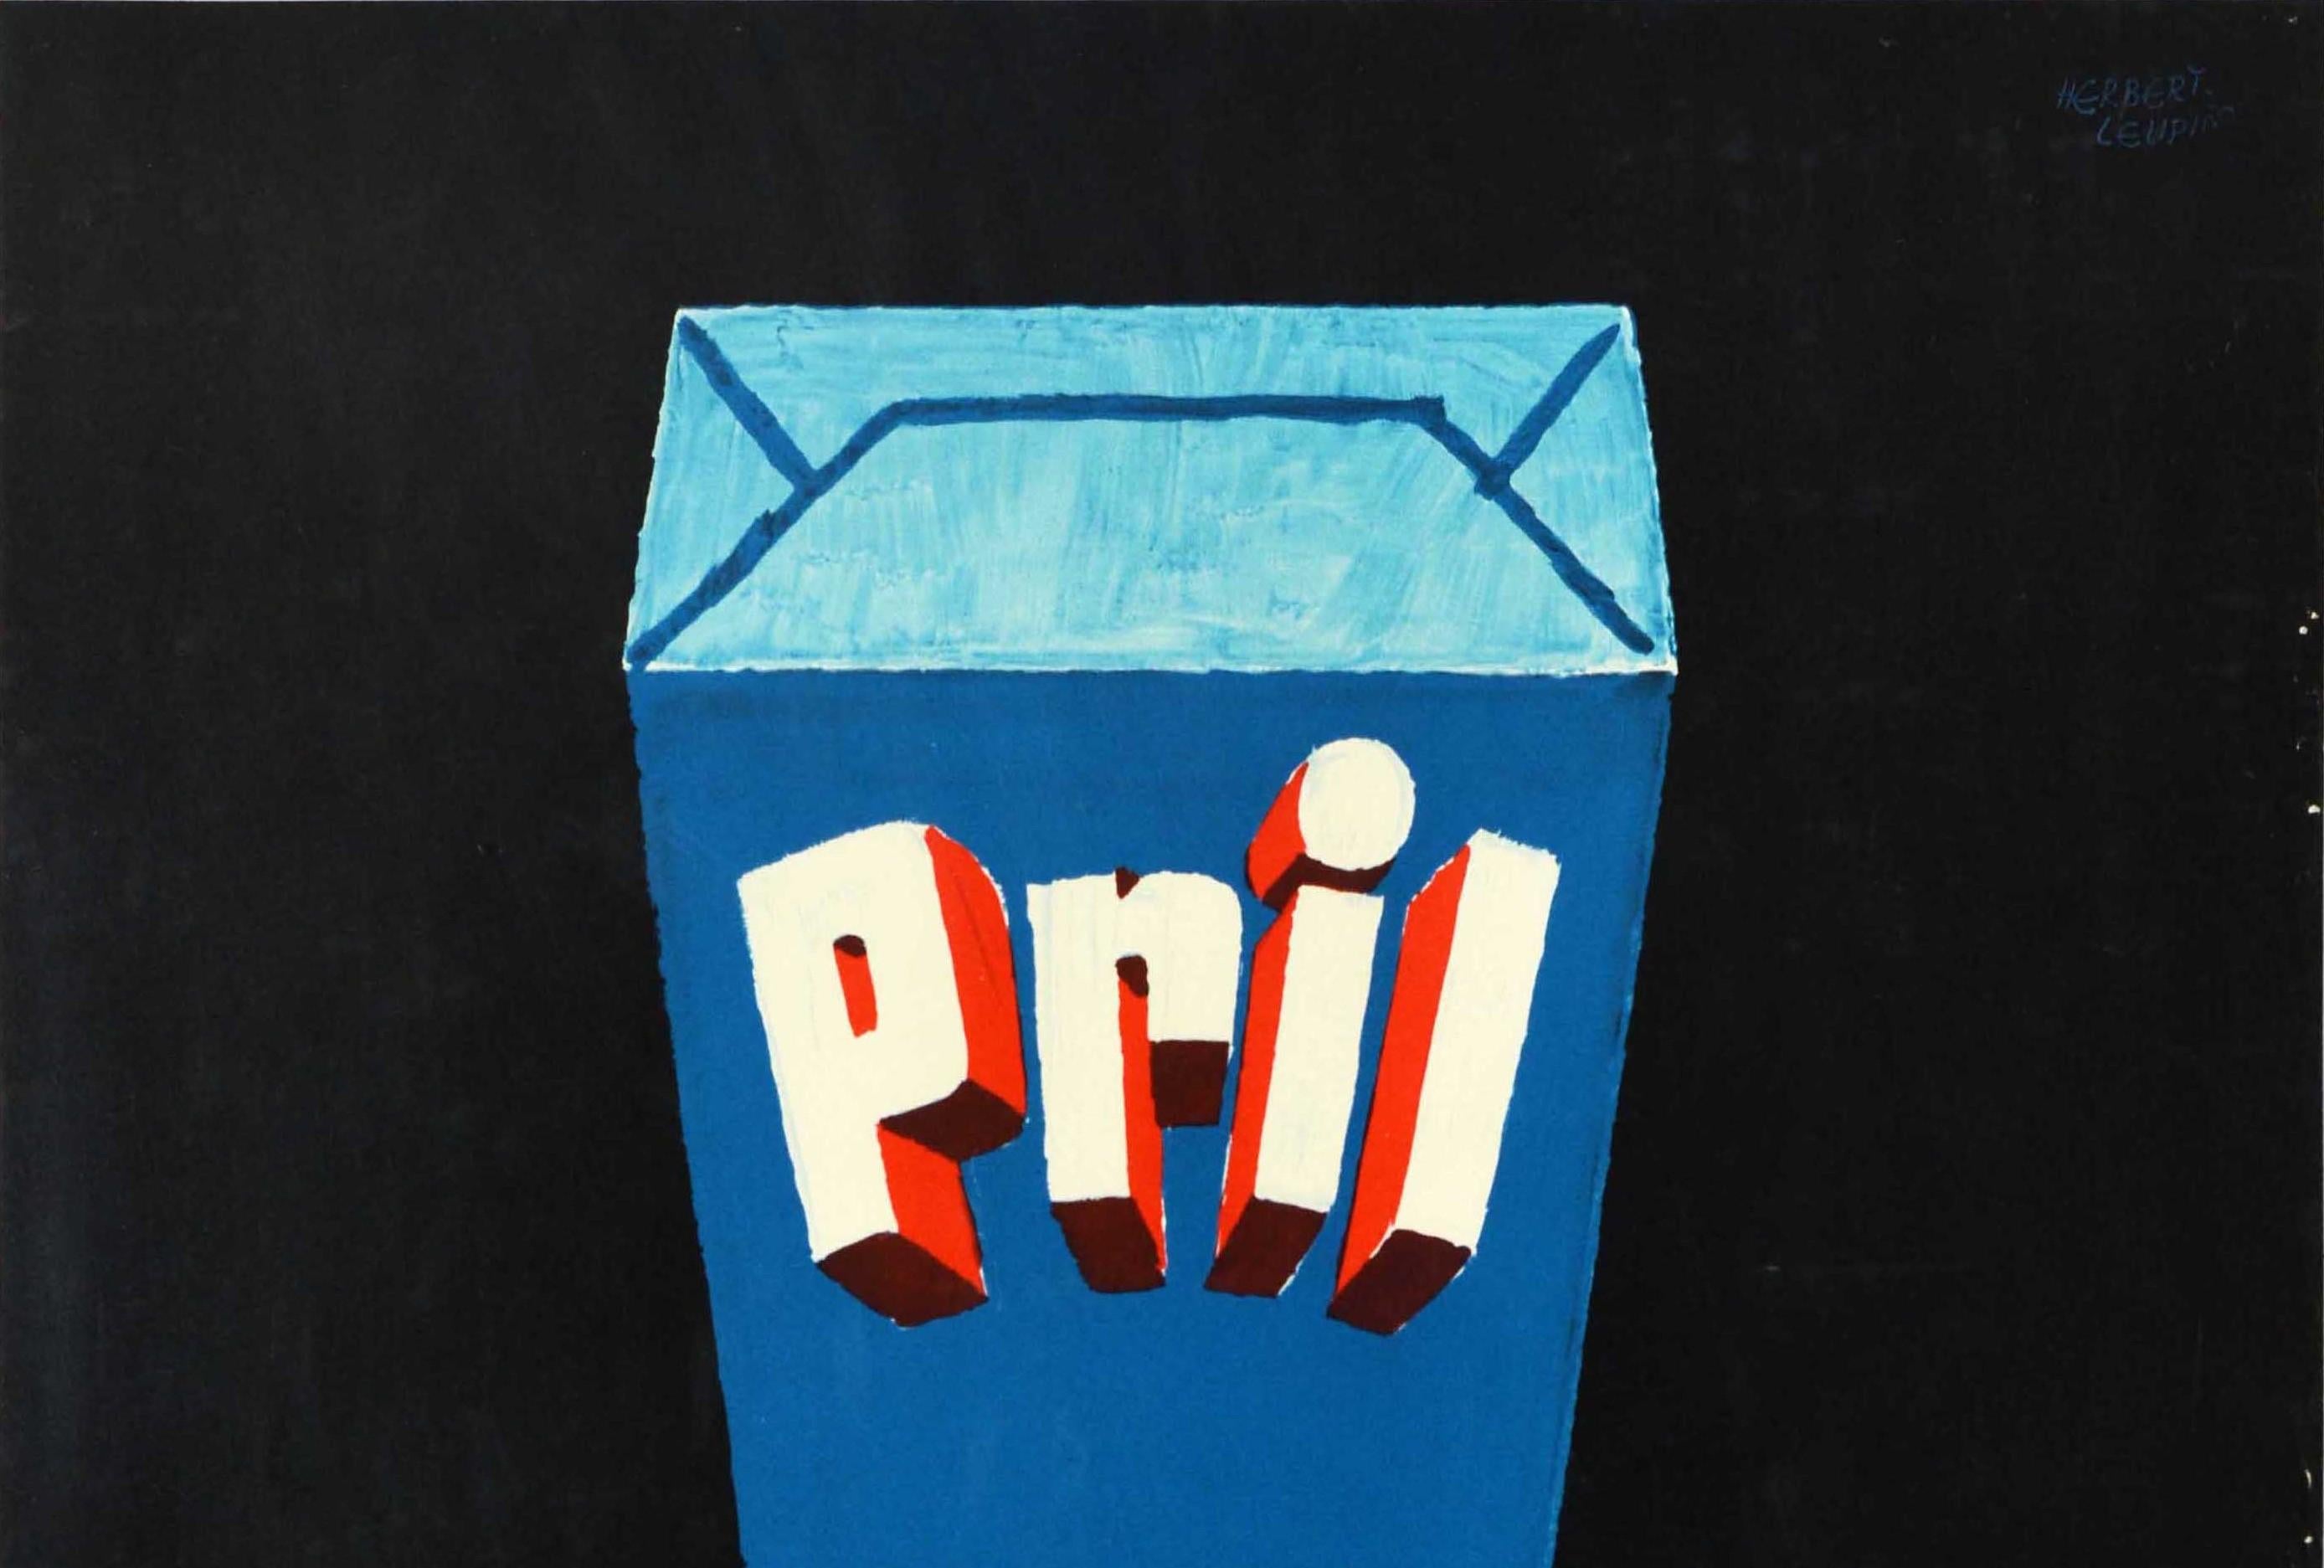 Original Vintage Advertising Poster For Pril Washing Up Powder Relaxes The Water - Print by Herbert Leupin